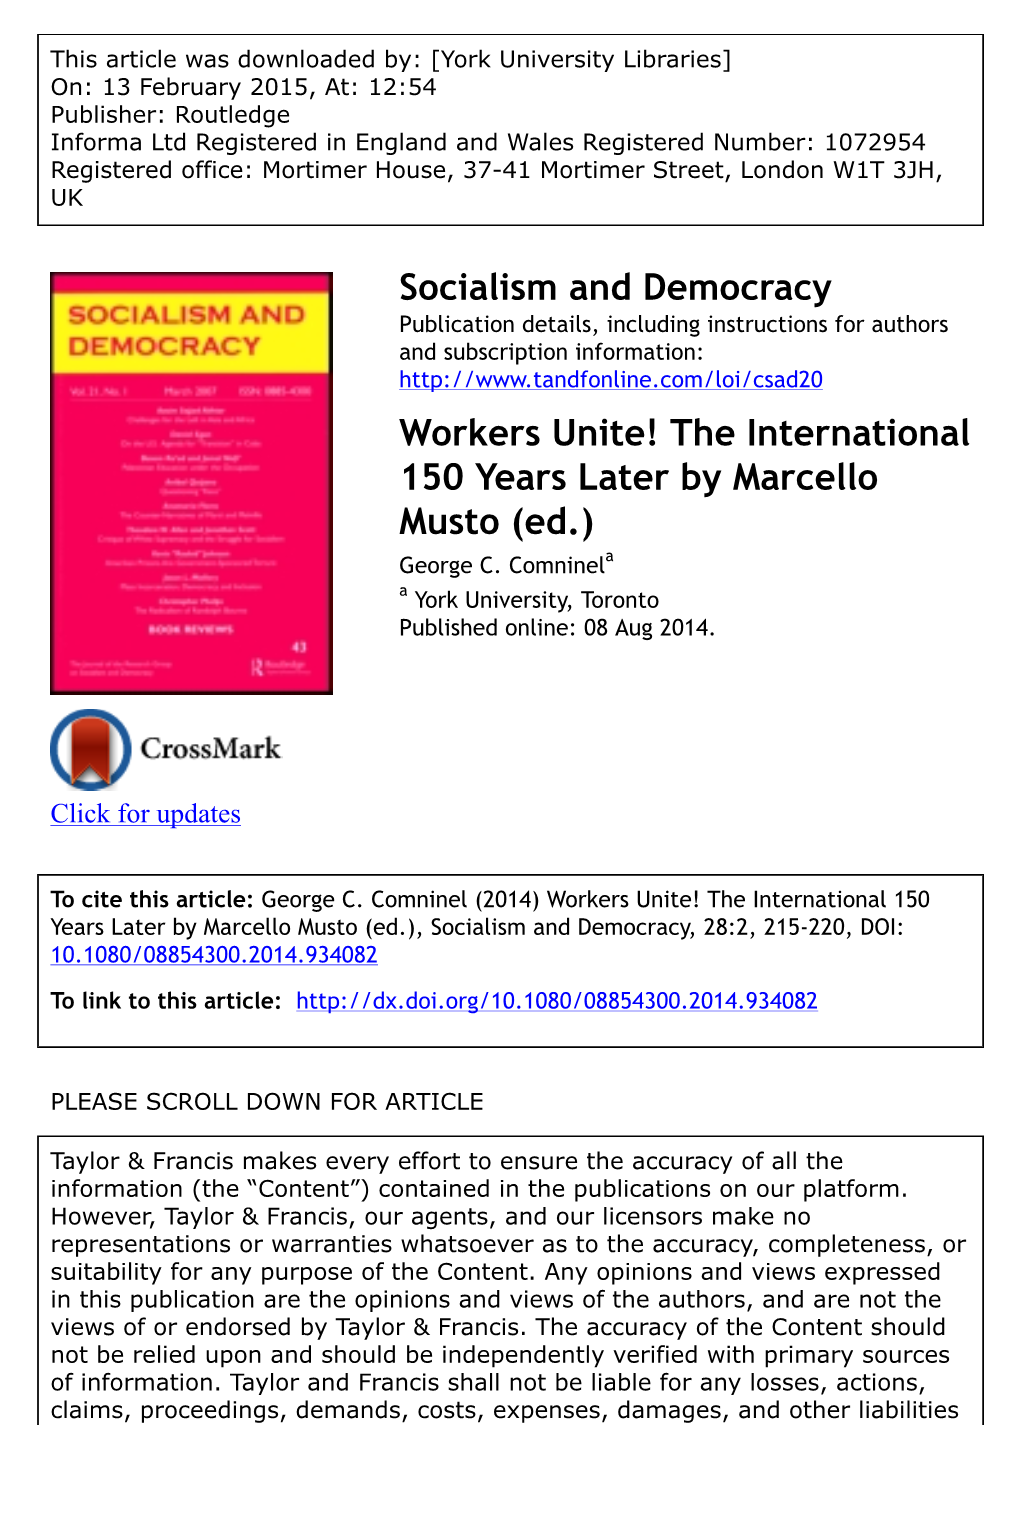 Workers Unite! the International 150 Years Later by Marcello Musto (Ed.) George C